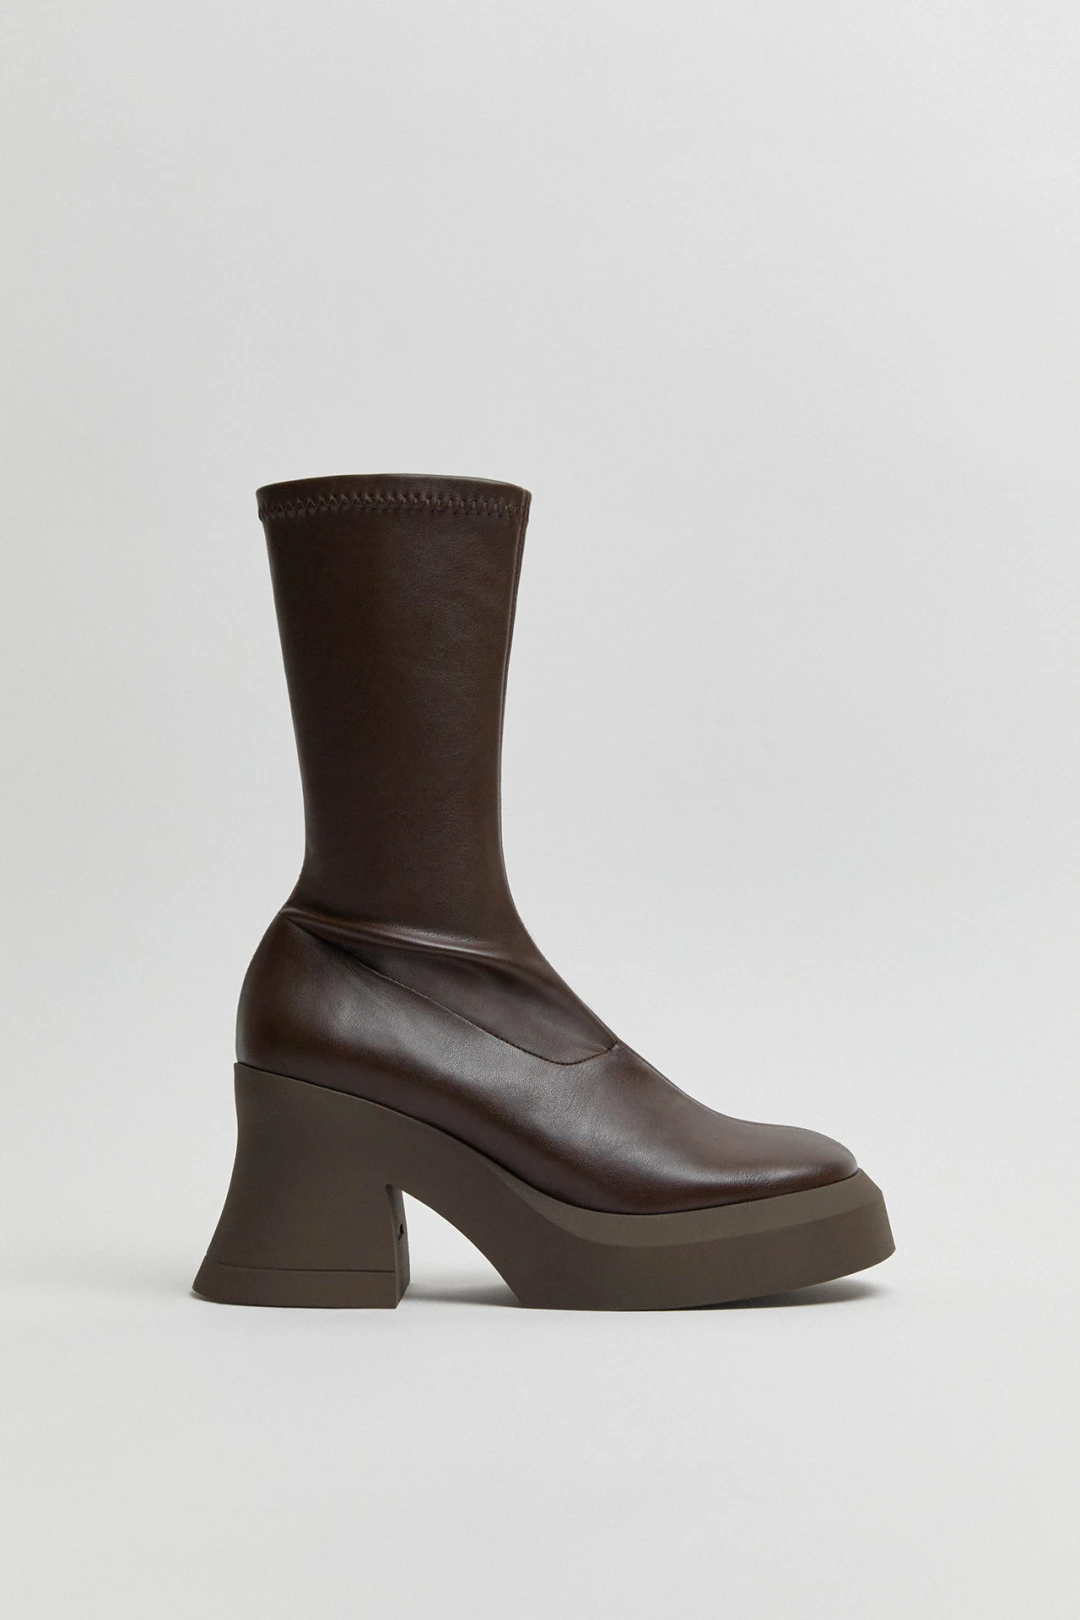 Aura Brown Boots | Miista Europe | Made in Portugal